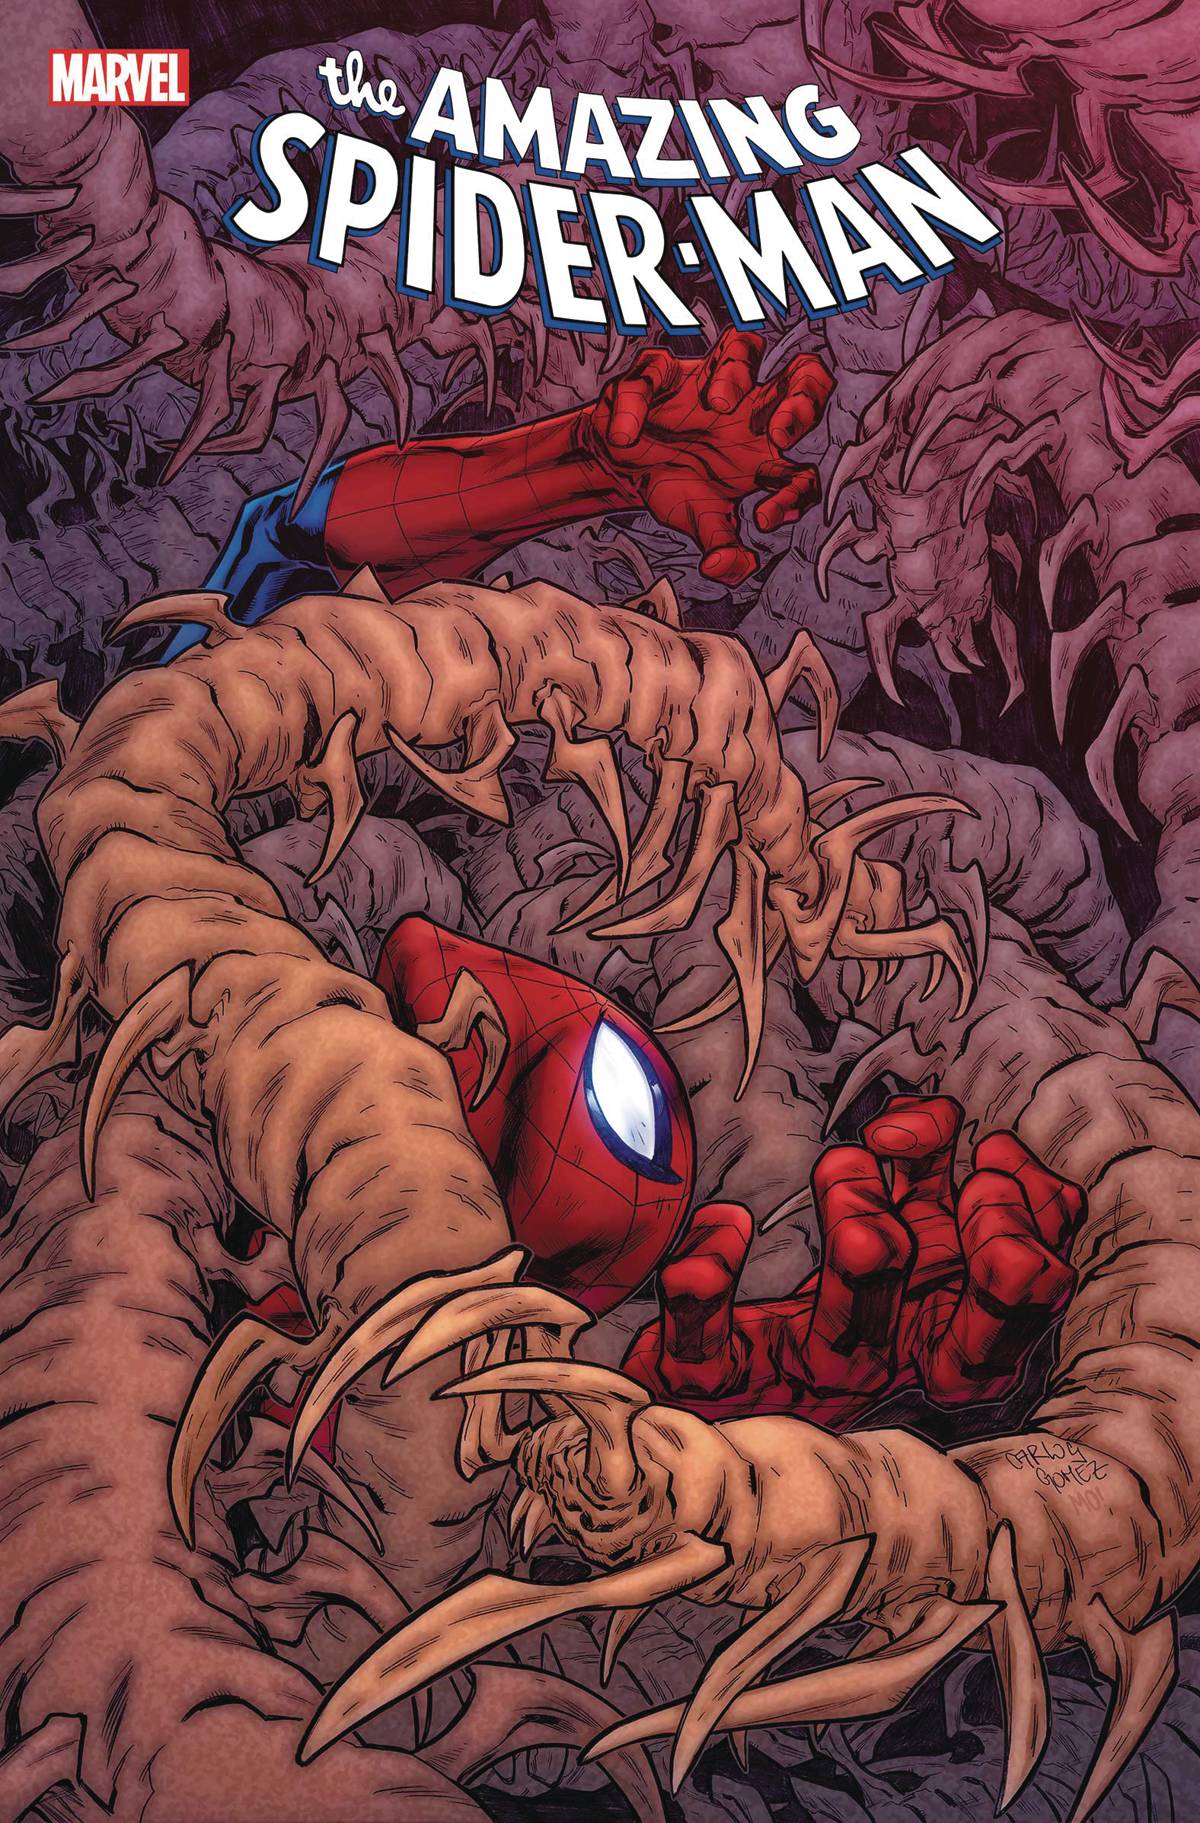 Spider-Man 44 - Heroes Cave